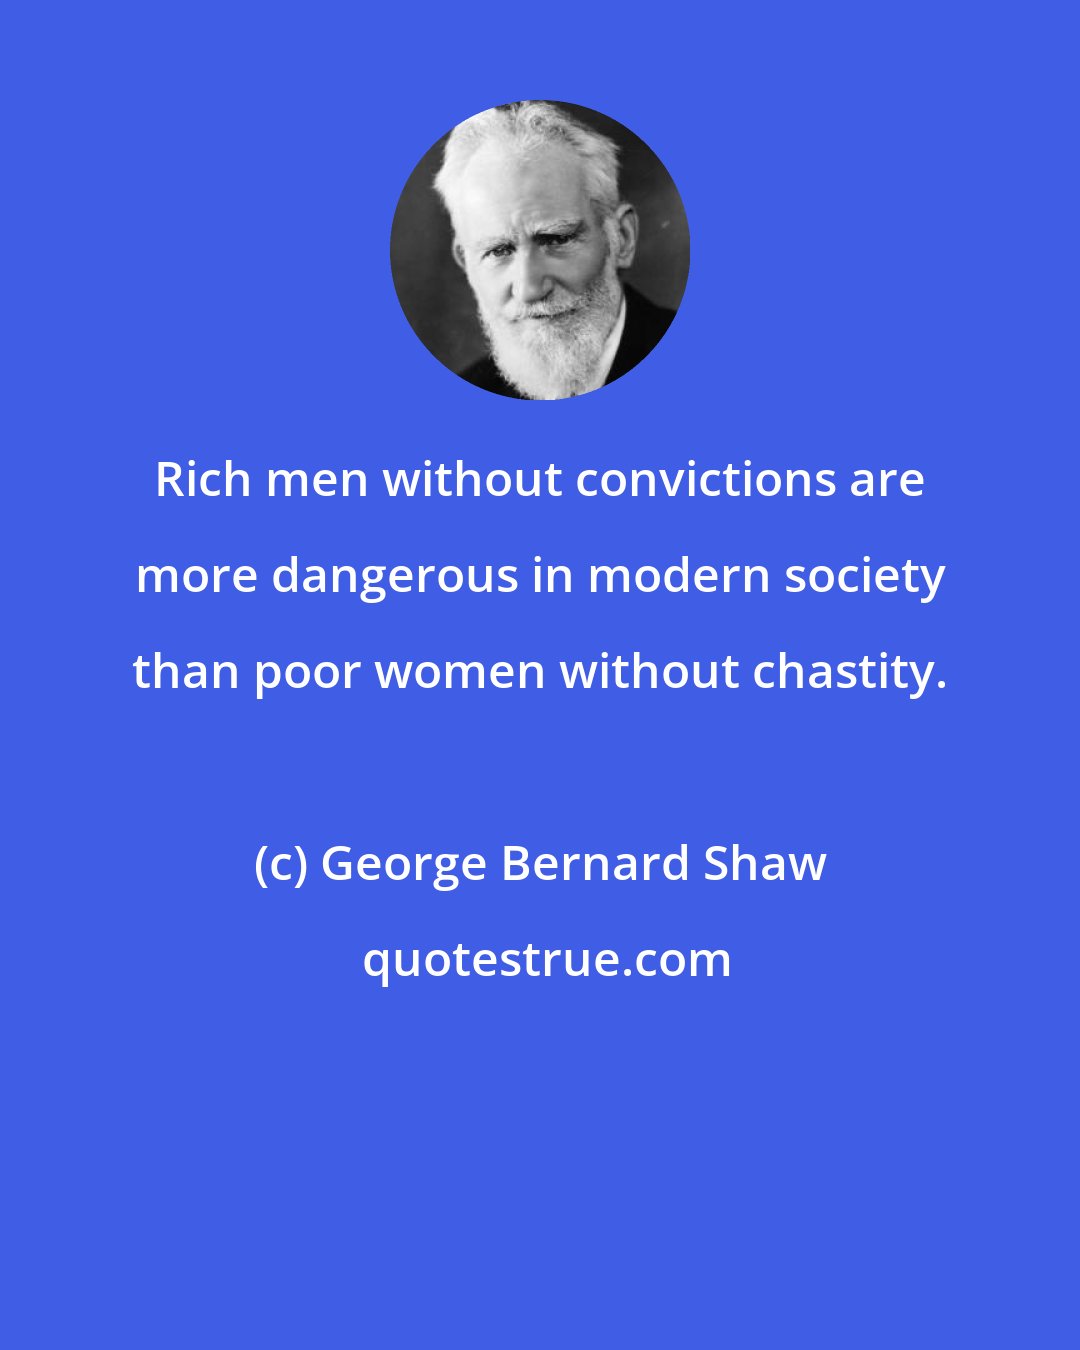 George Bernard Shaw: Rich men without convictions are more dangerous in modern society than poor women without chastity.